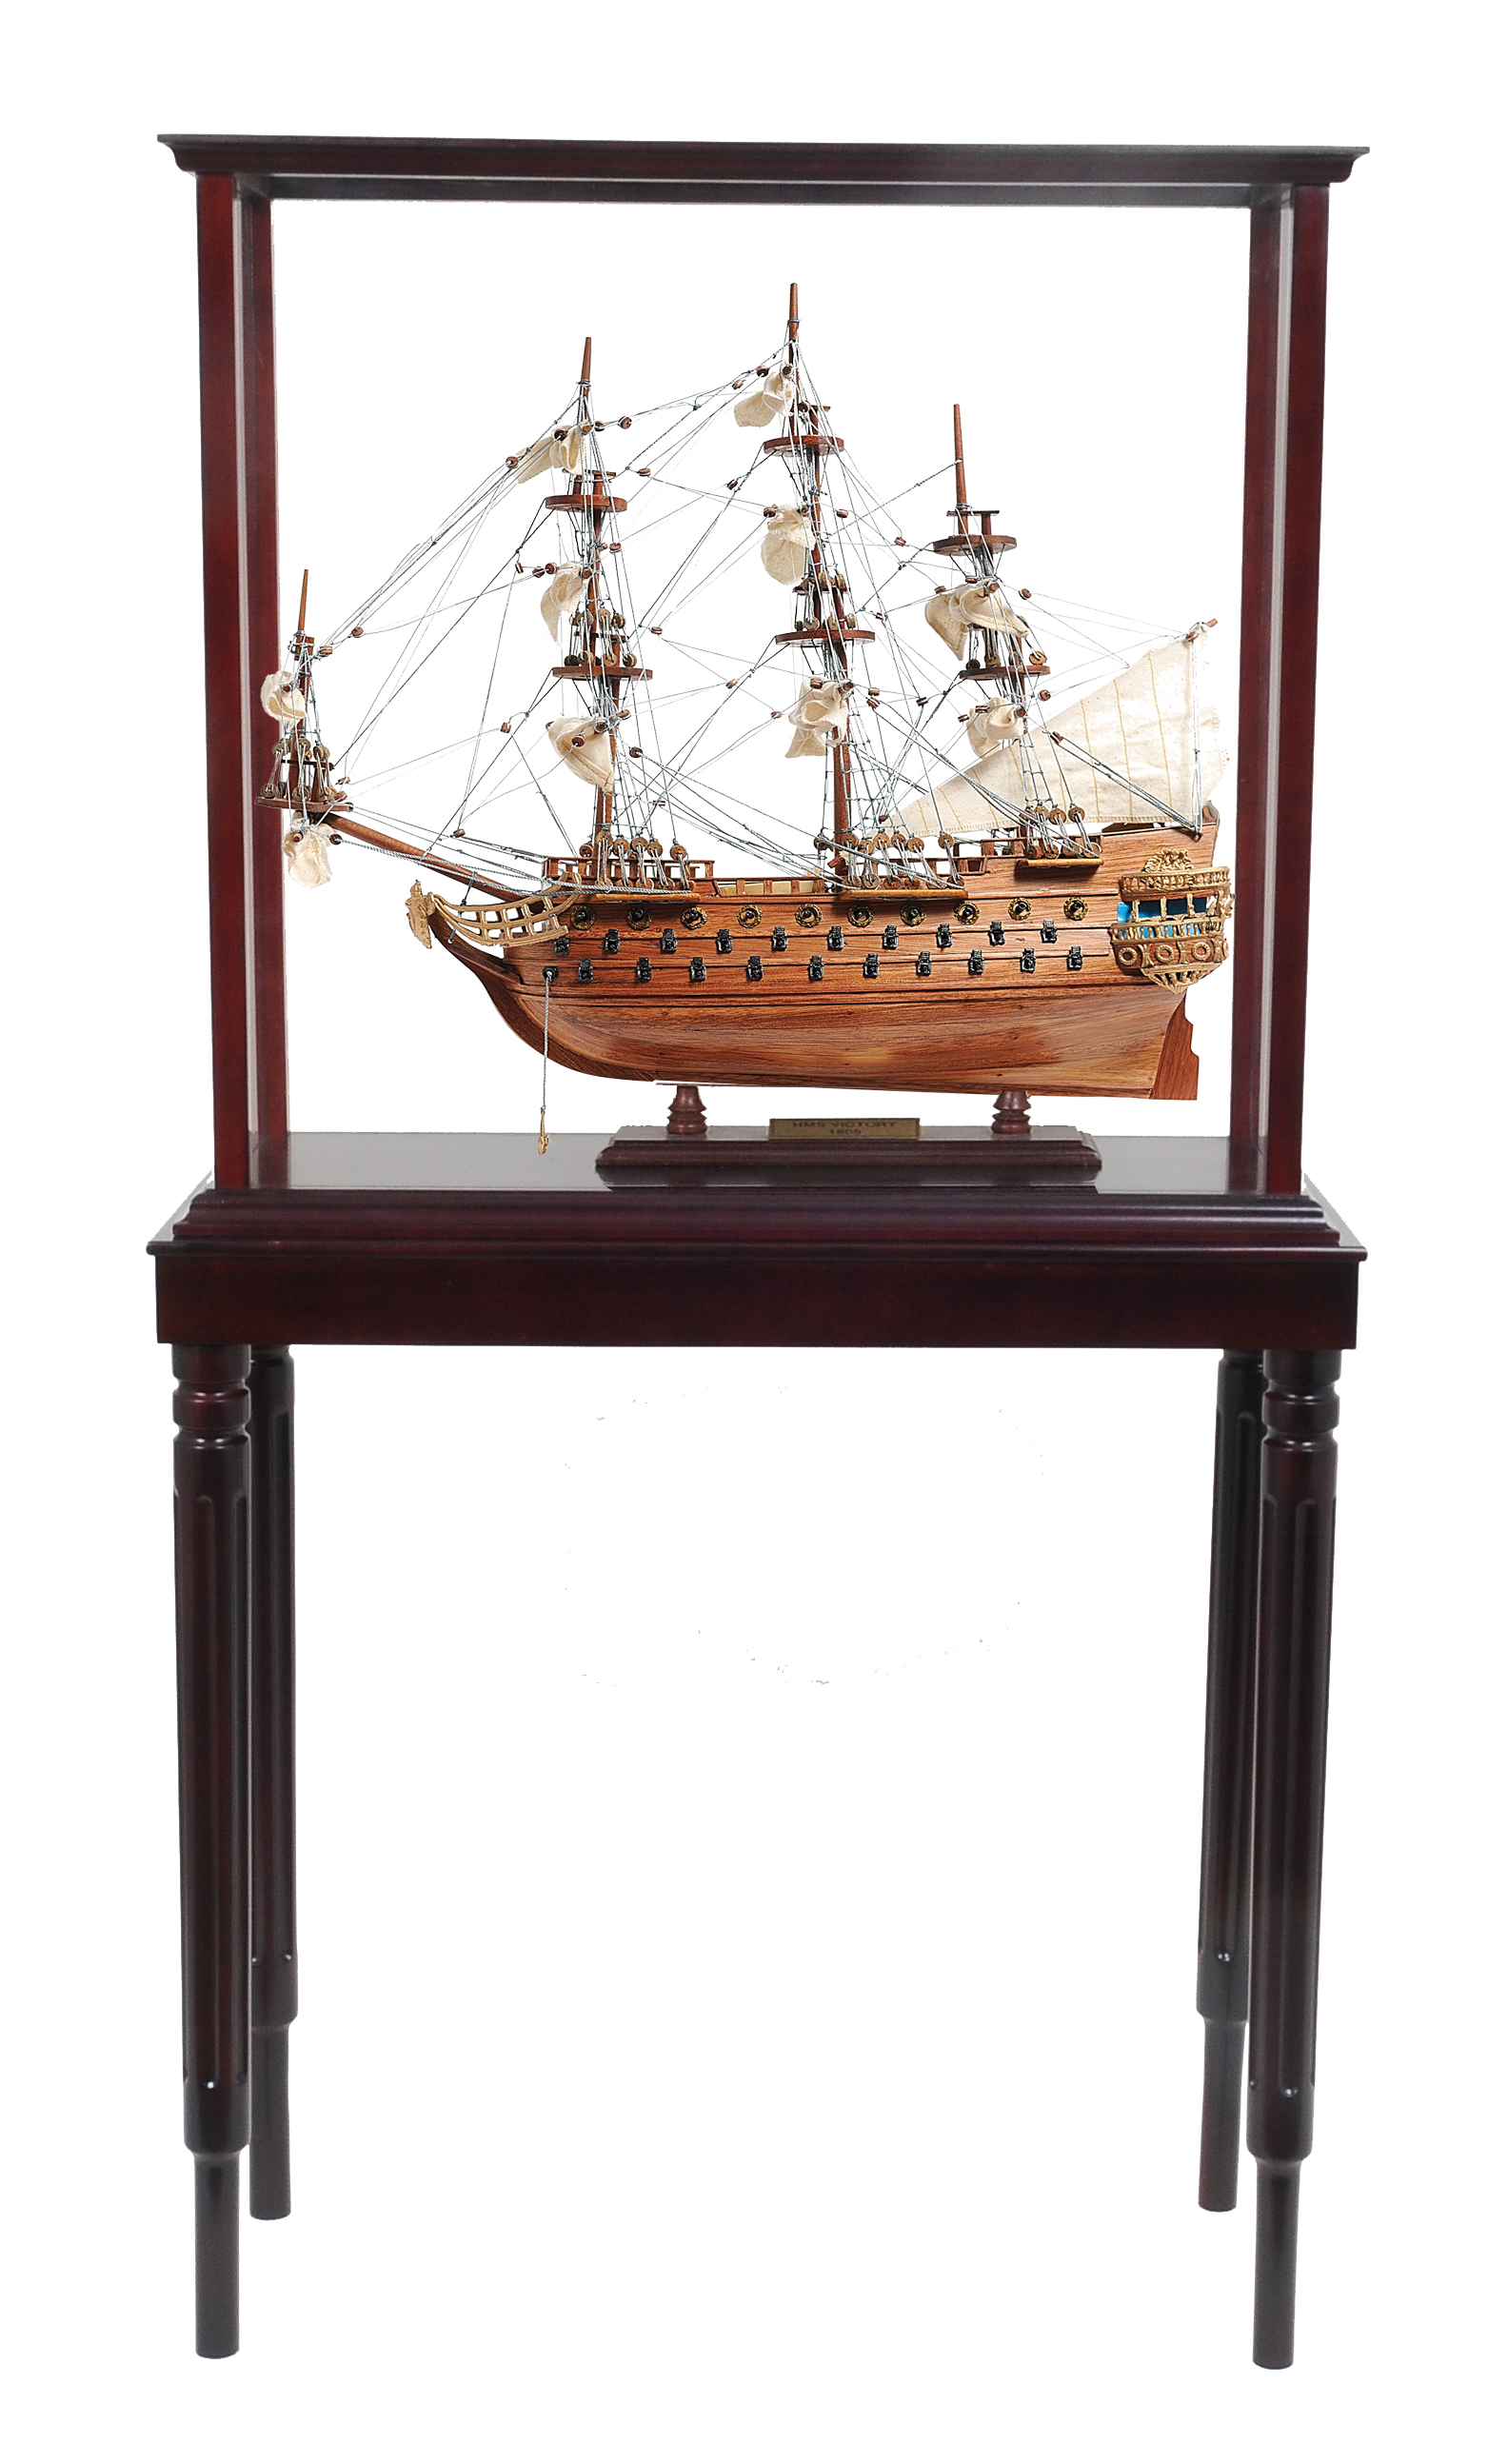 T147A San Felipe Small with Display Case t147a-san-felipe-small-with-display-case-l01.jpg